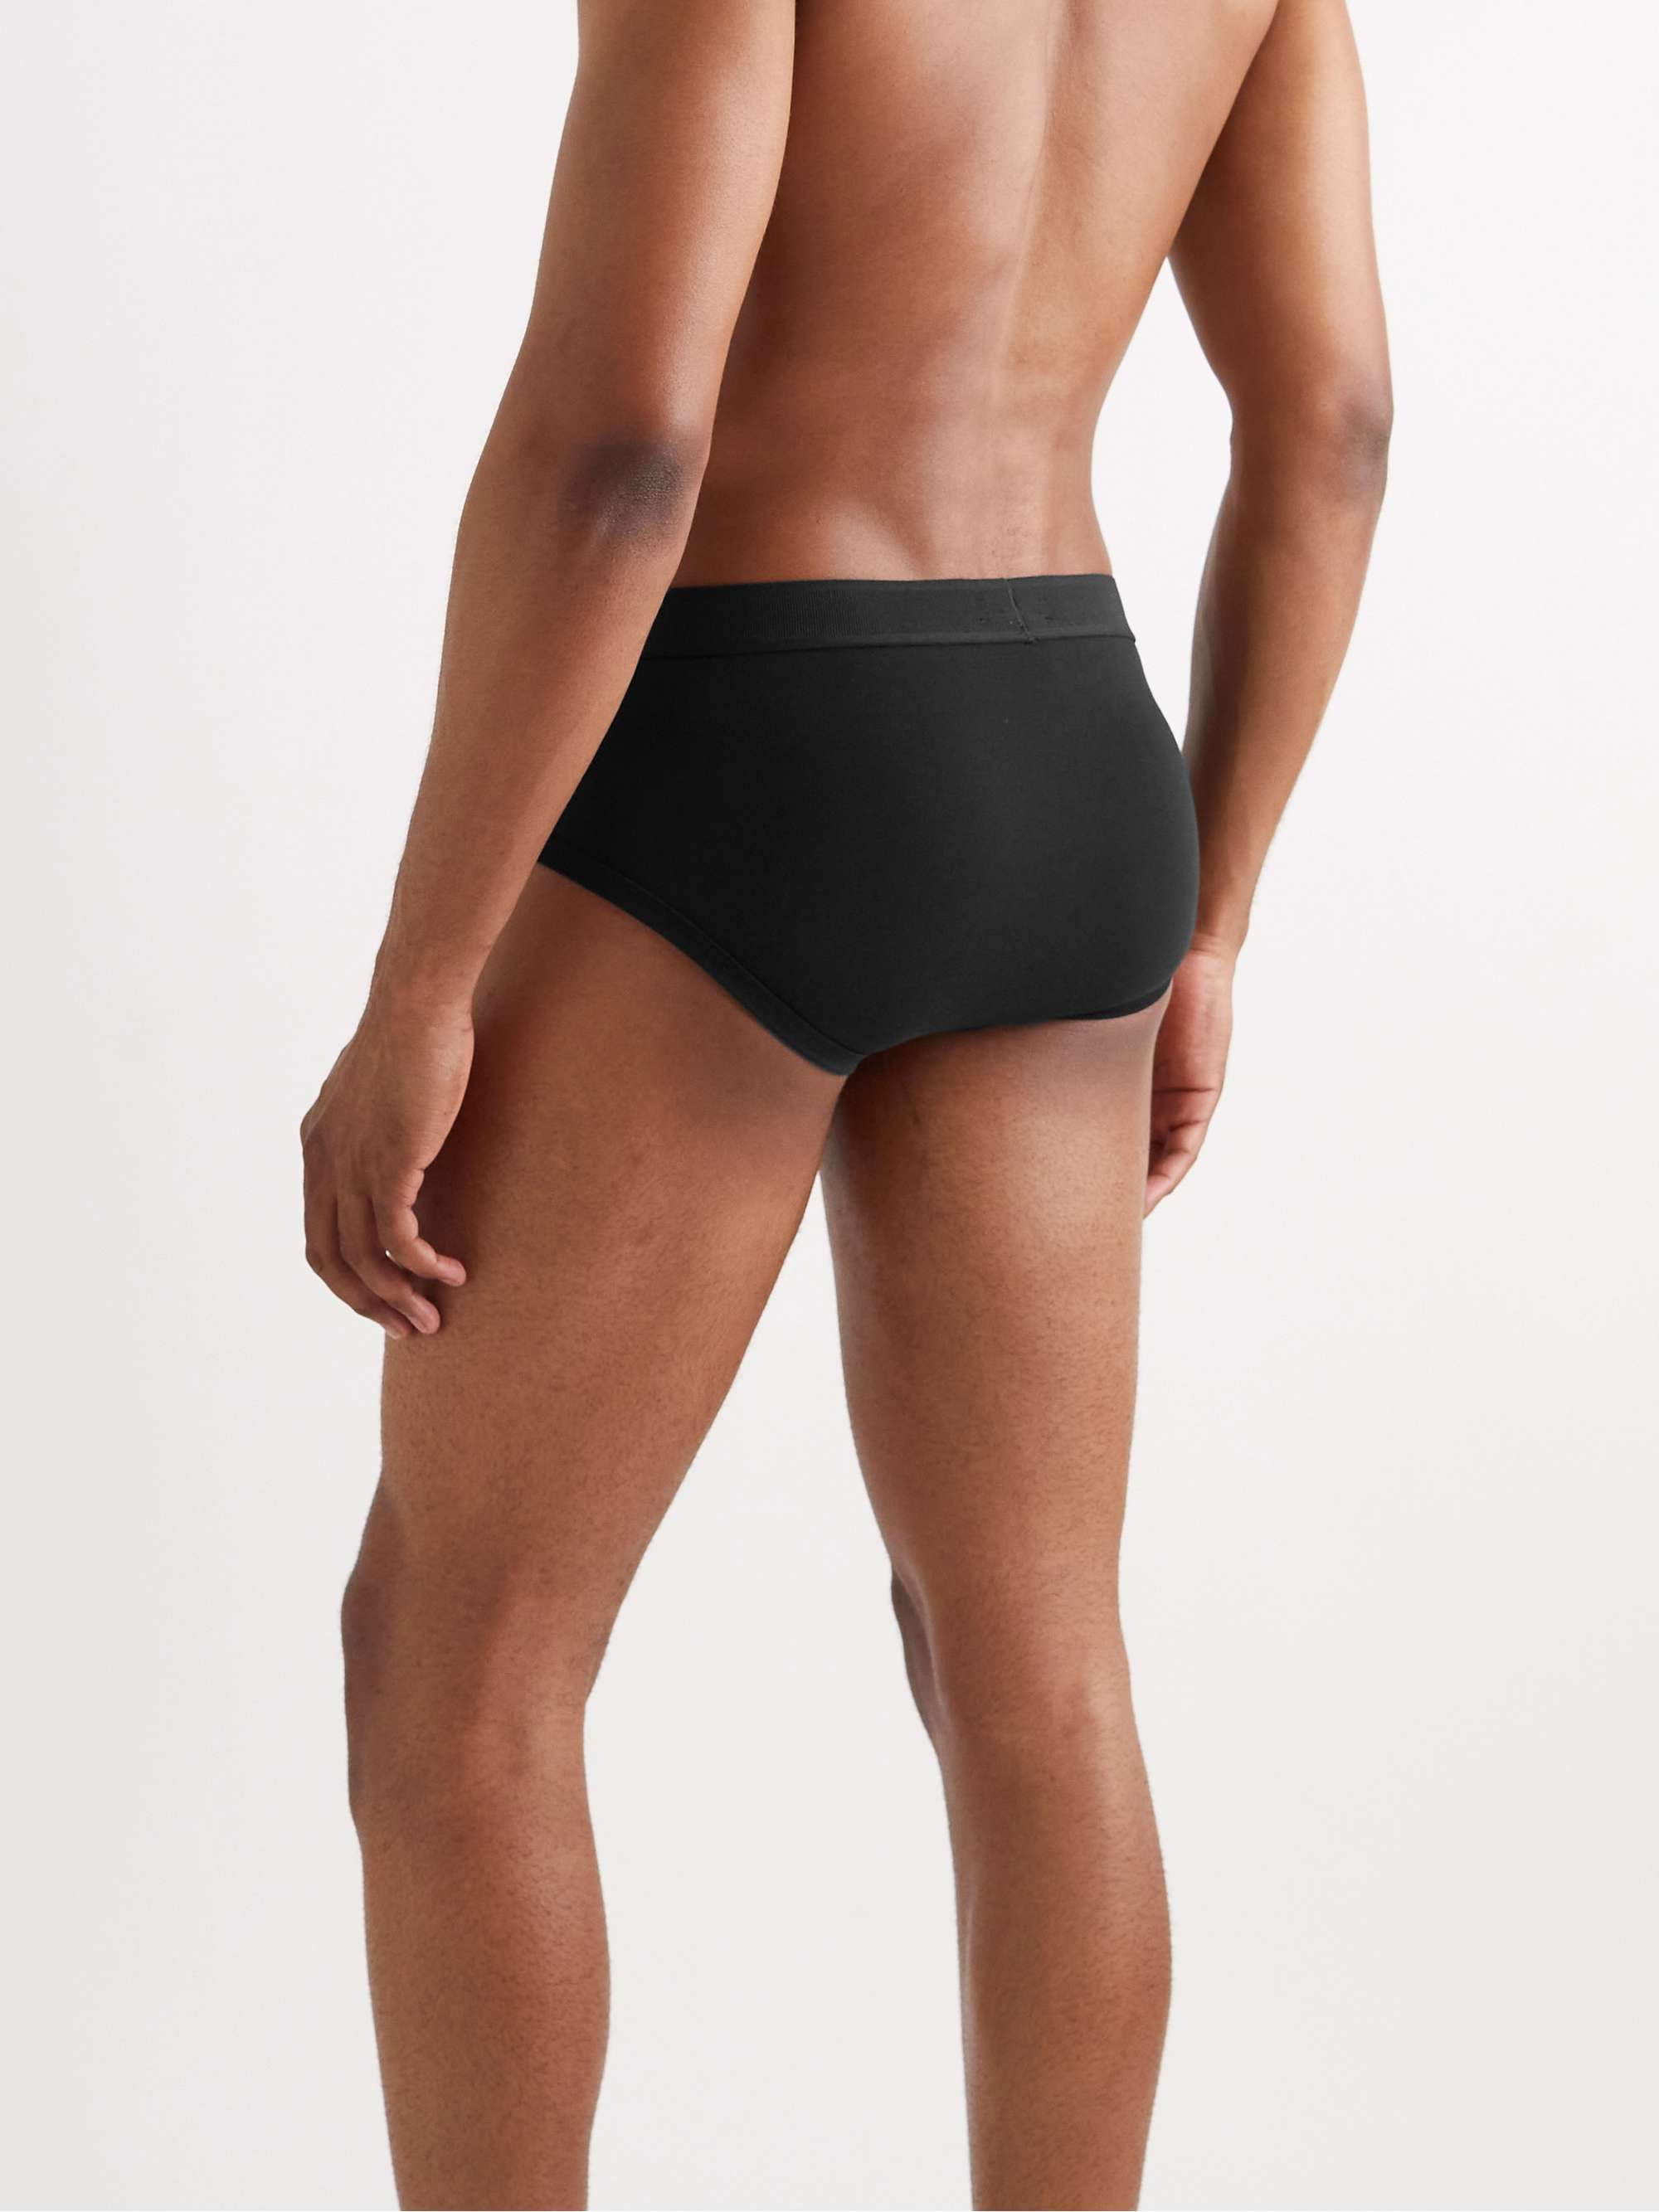 TOM FORD Two-Pack Stretch Cotton and Modal-Blend Briefs